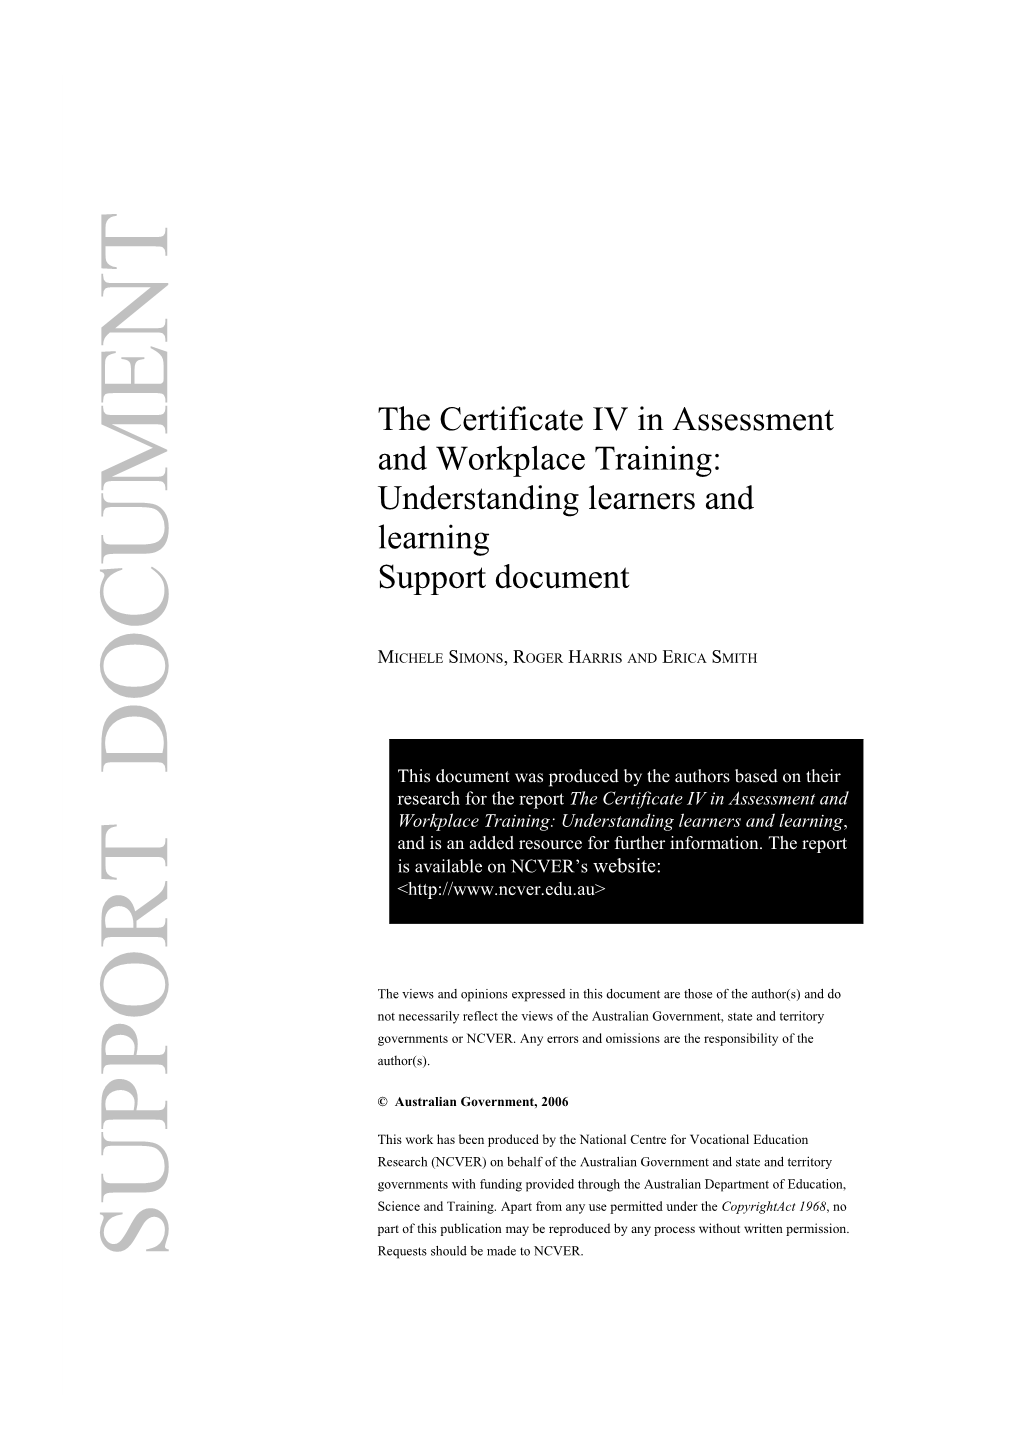 The Certificate IV in Assessment and Workplace Training